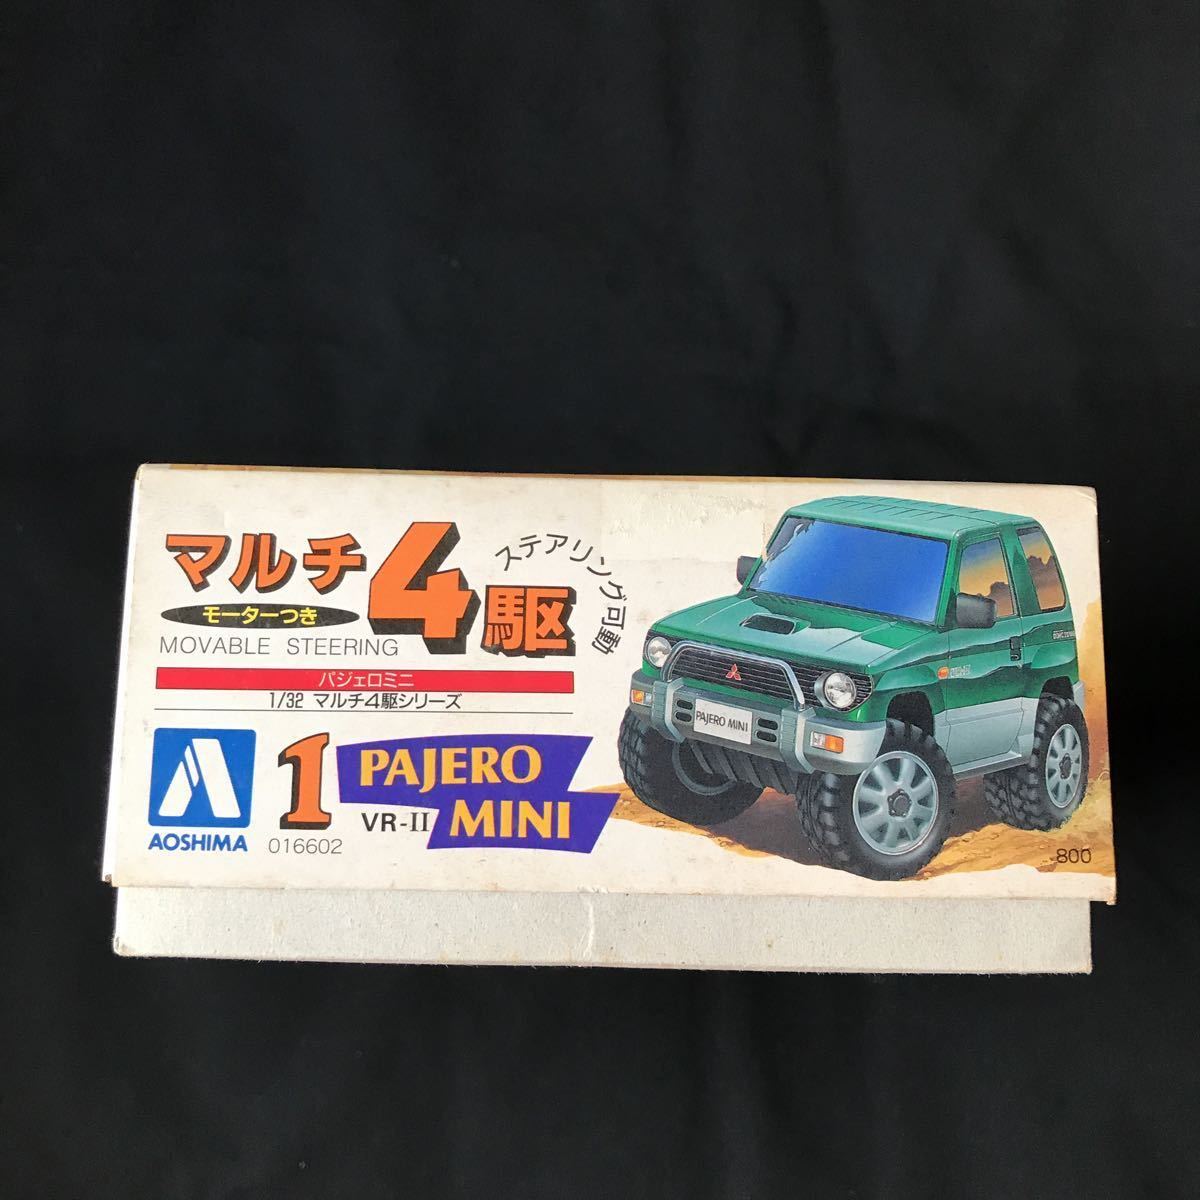  including carriage : Aoshima Pajero Mini VR-2 multi 4. not yet constructed 1/32 plastic model 